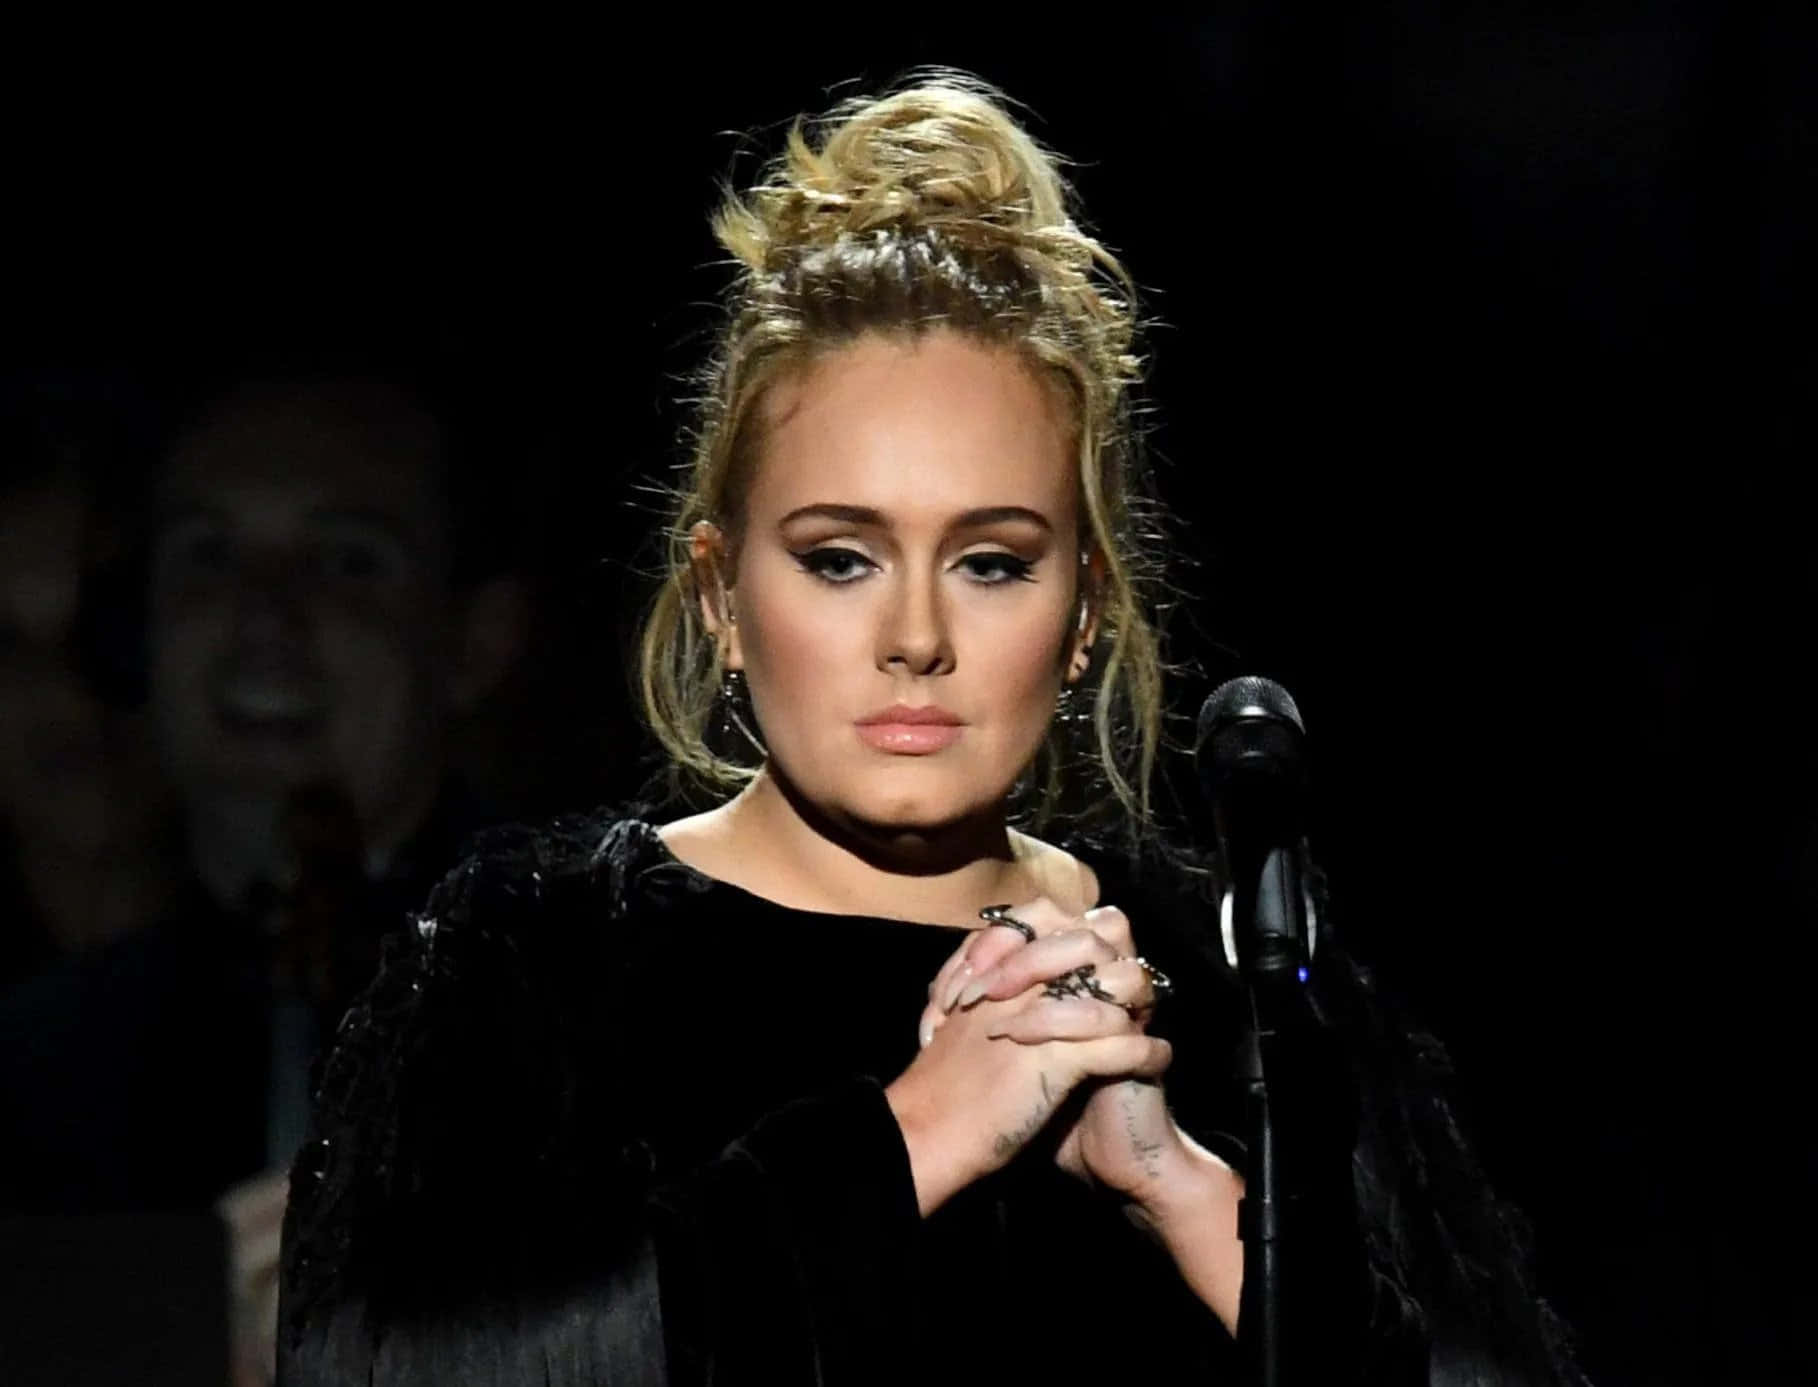 Adele graces the red carpet with her signature style and grace.